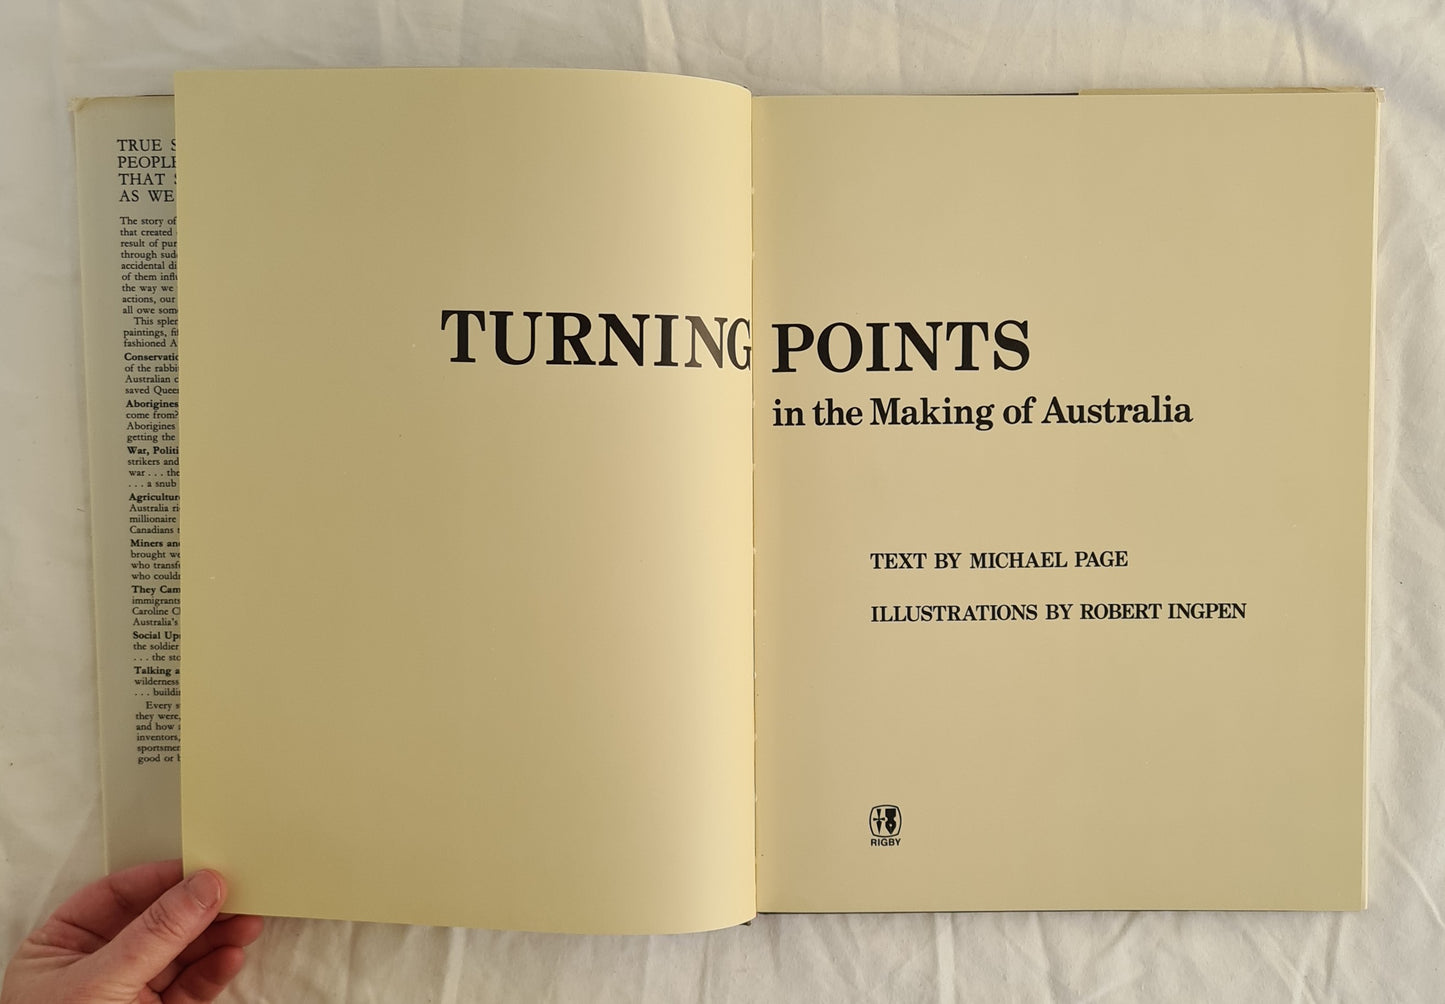 Turning Points by Michael Page and Robert Ingpen